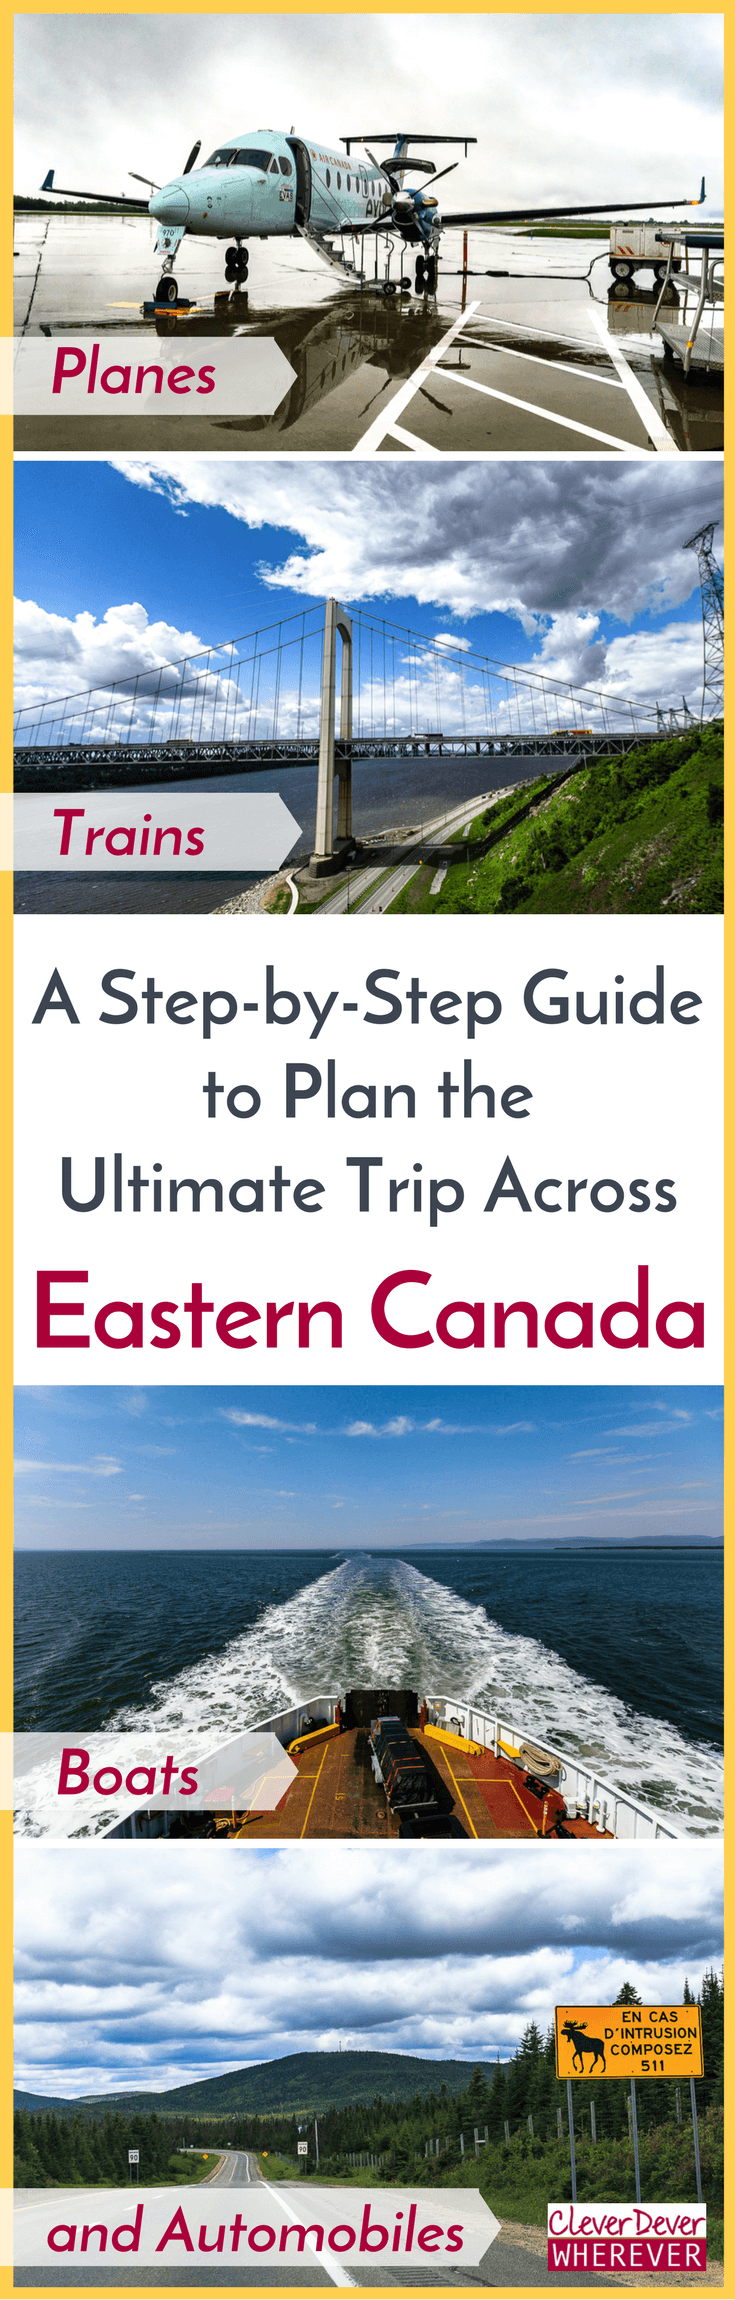 Thinking about a Canada road trip? This 14 Day Itinerary takes you from Montreal to PEI. Download the free guide!